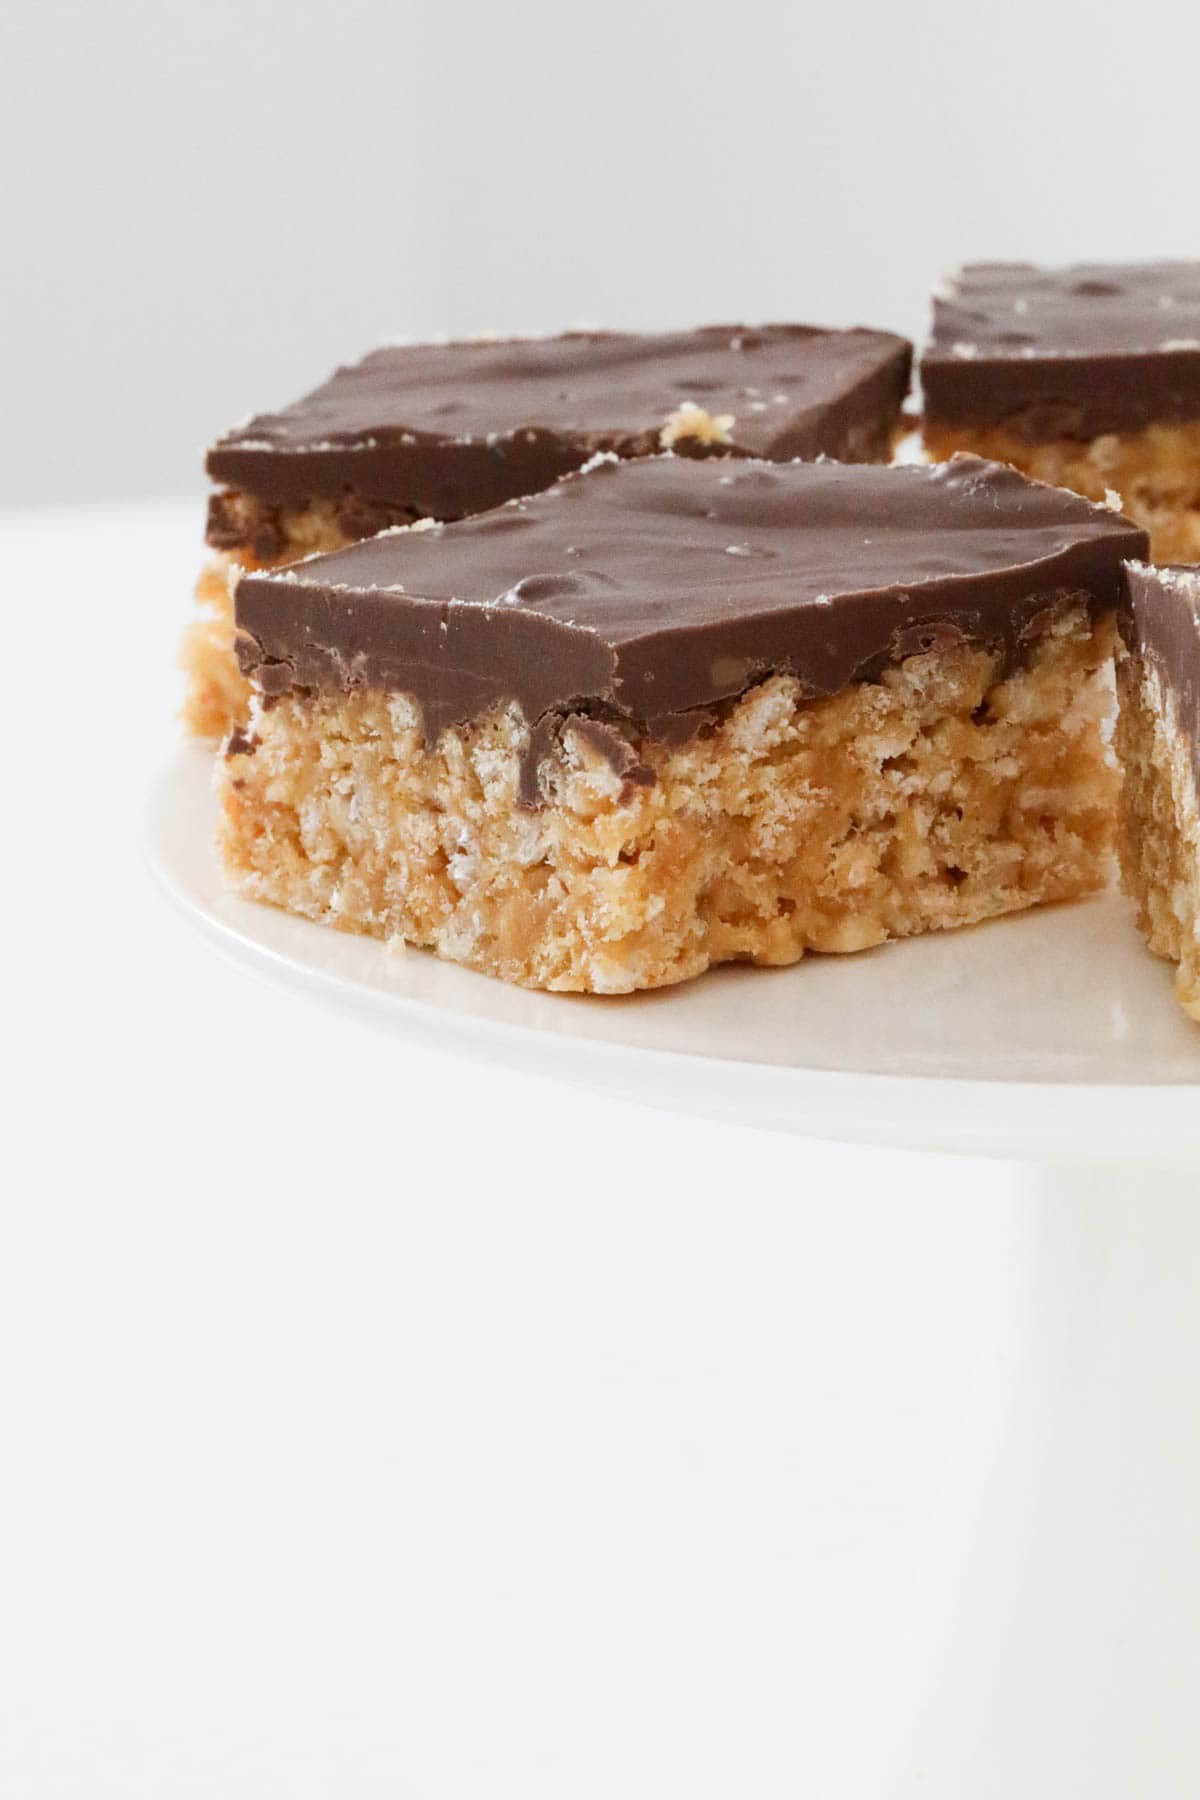 A cake stand with peanut butter slice with chocolate on top.